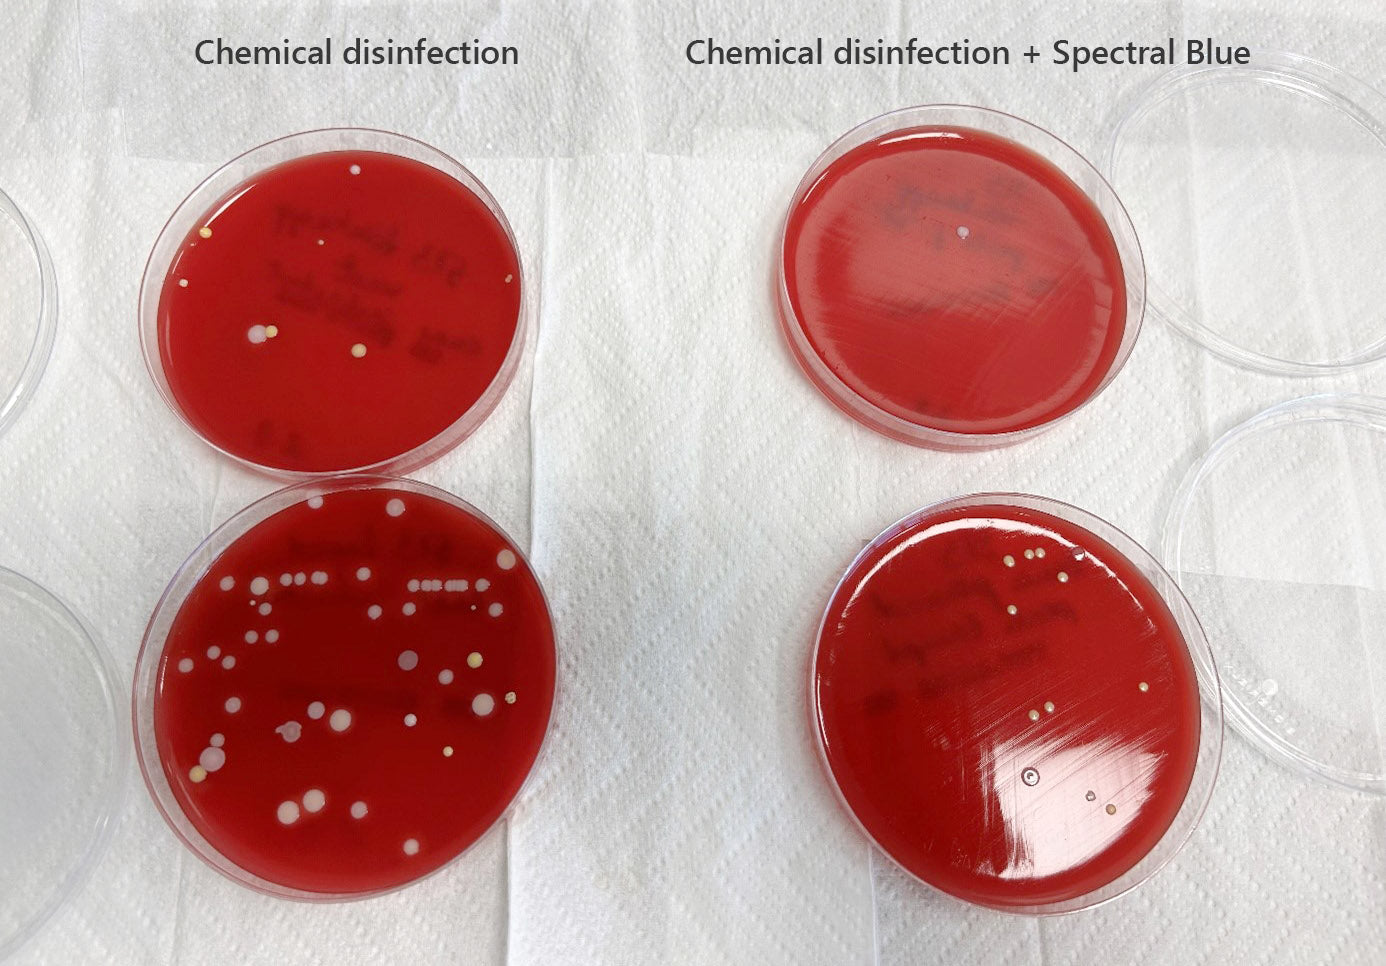 Synlab's test shows that chemical disinfectant doesn't always perform as expected. But Spectral Blue does.